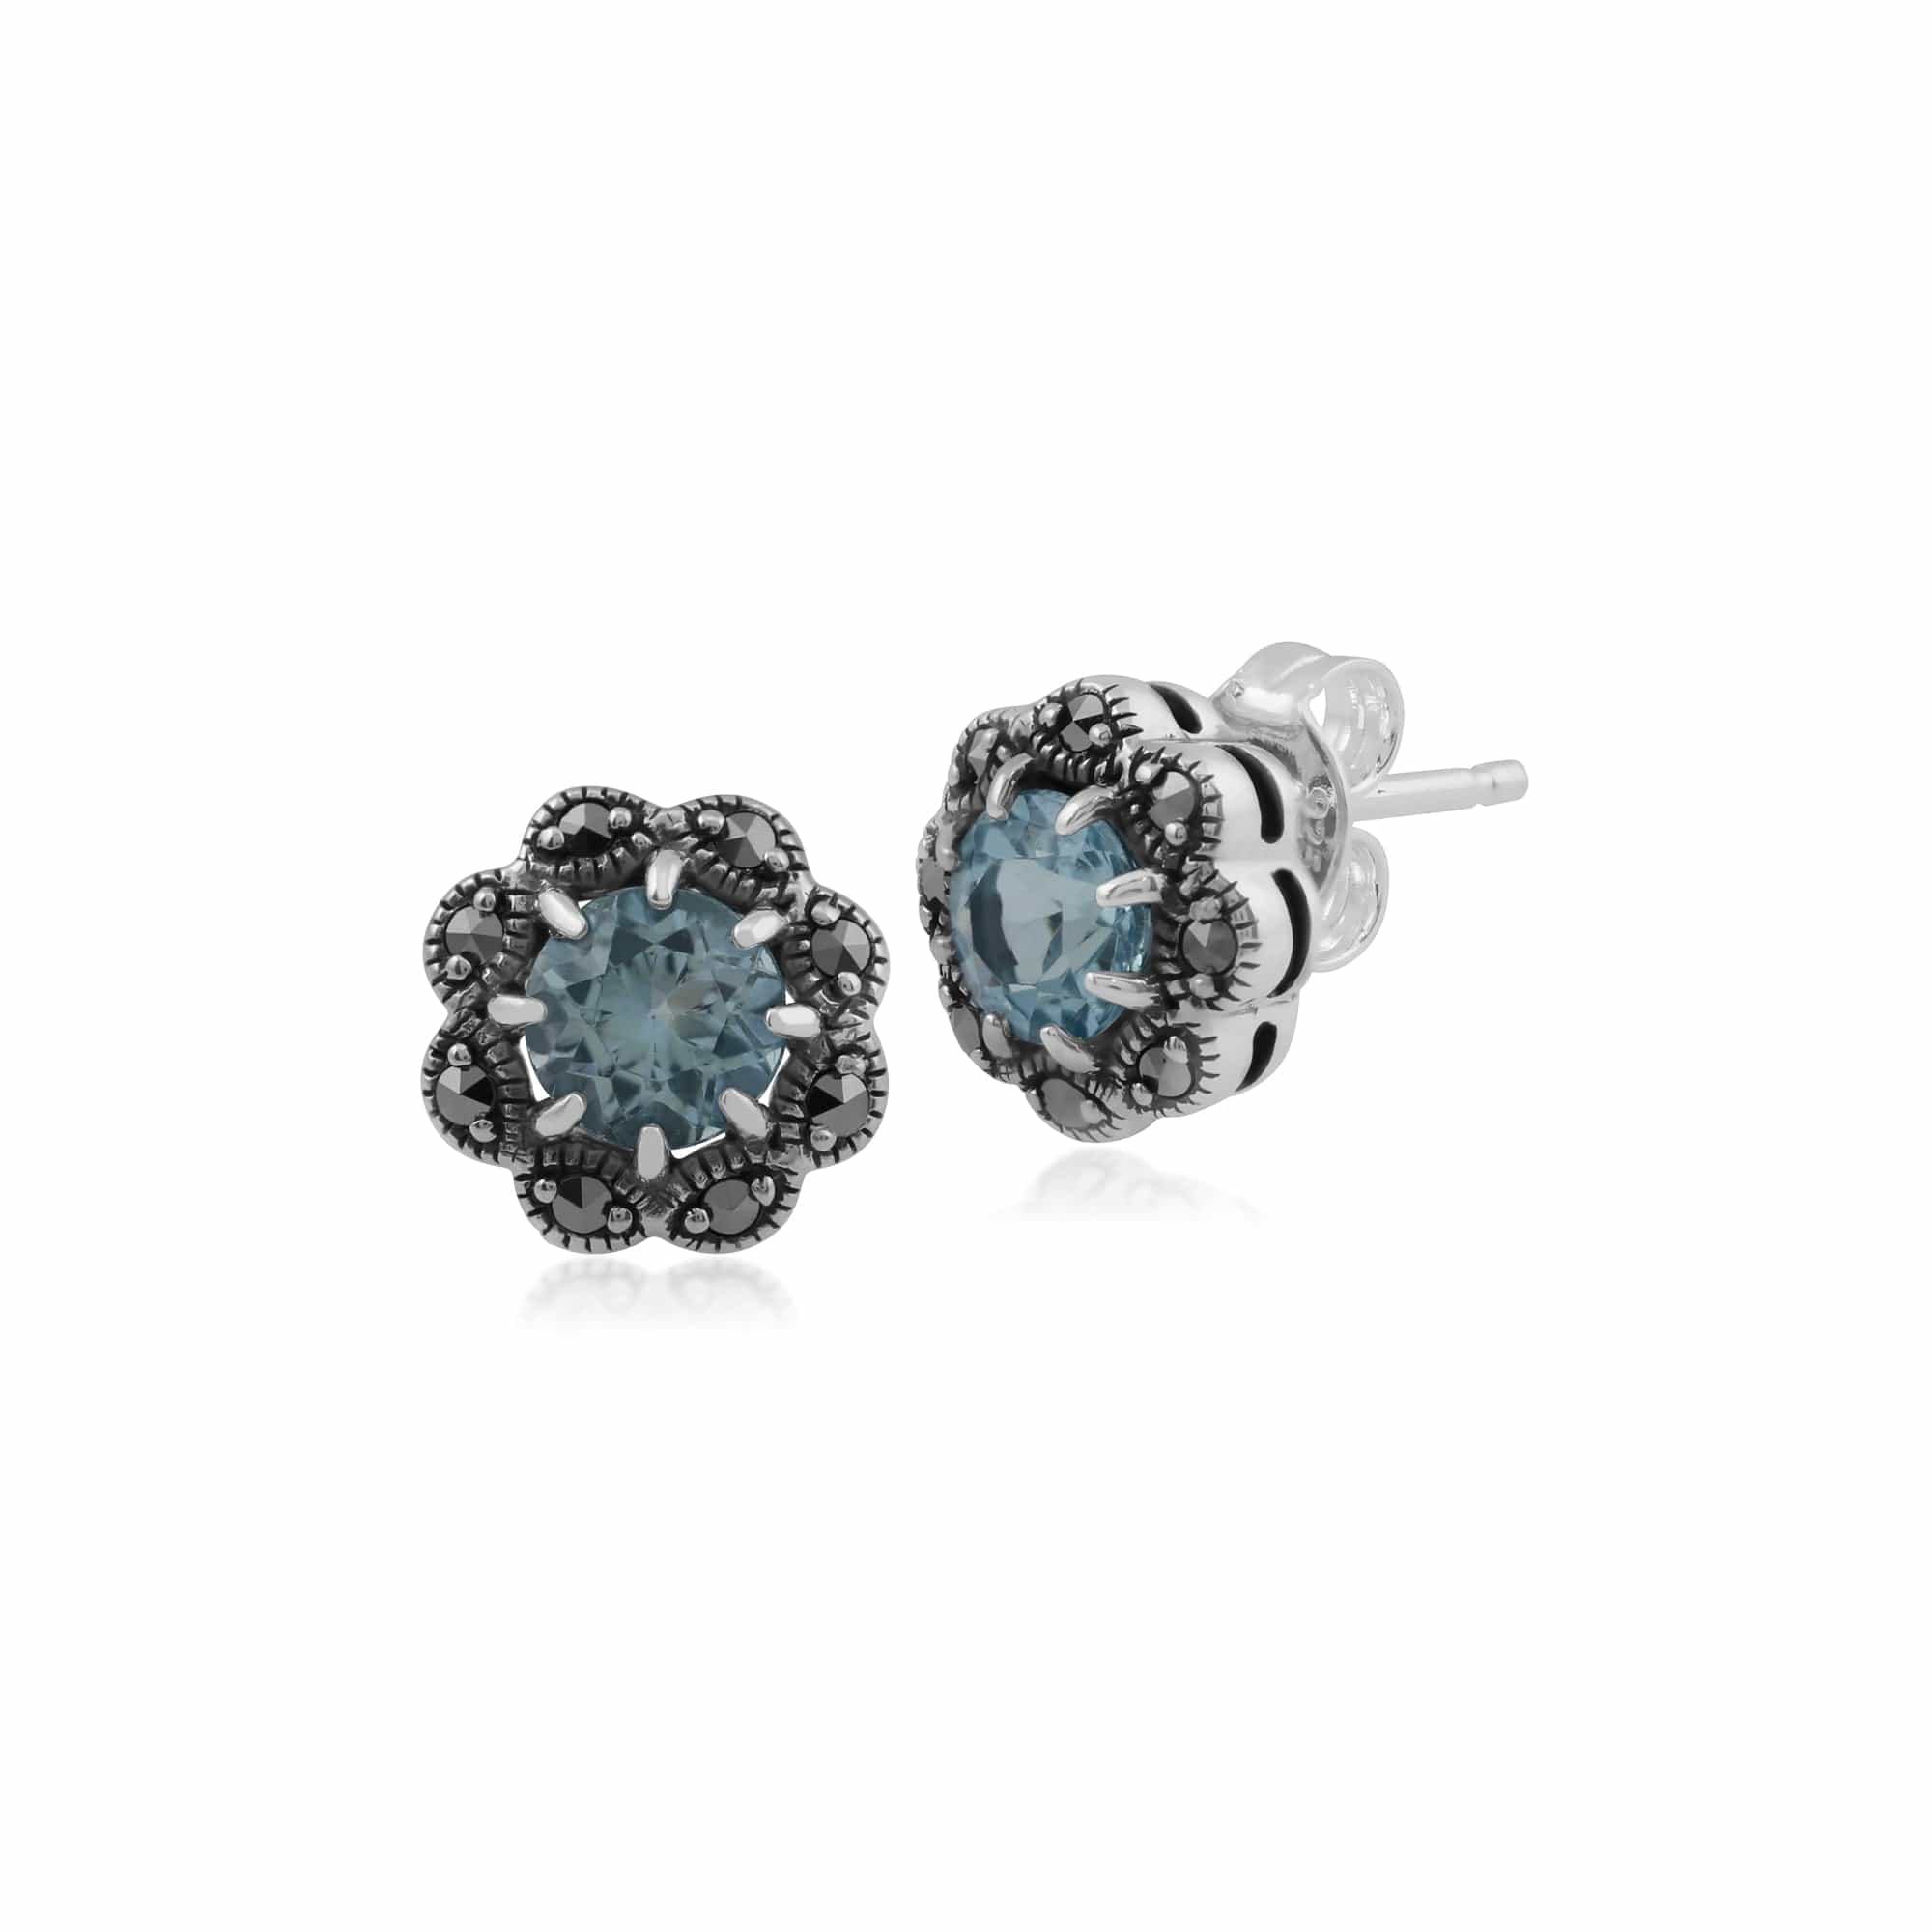 Stud earrings Topaz and Cluster Marcasite Silver